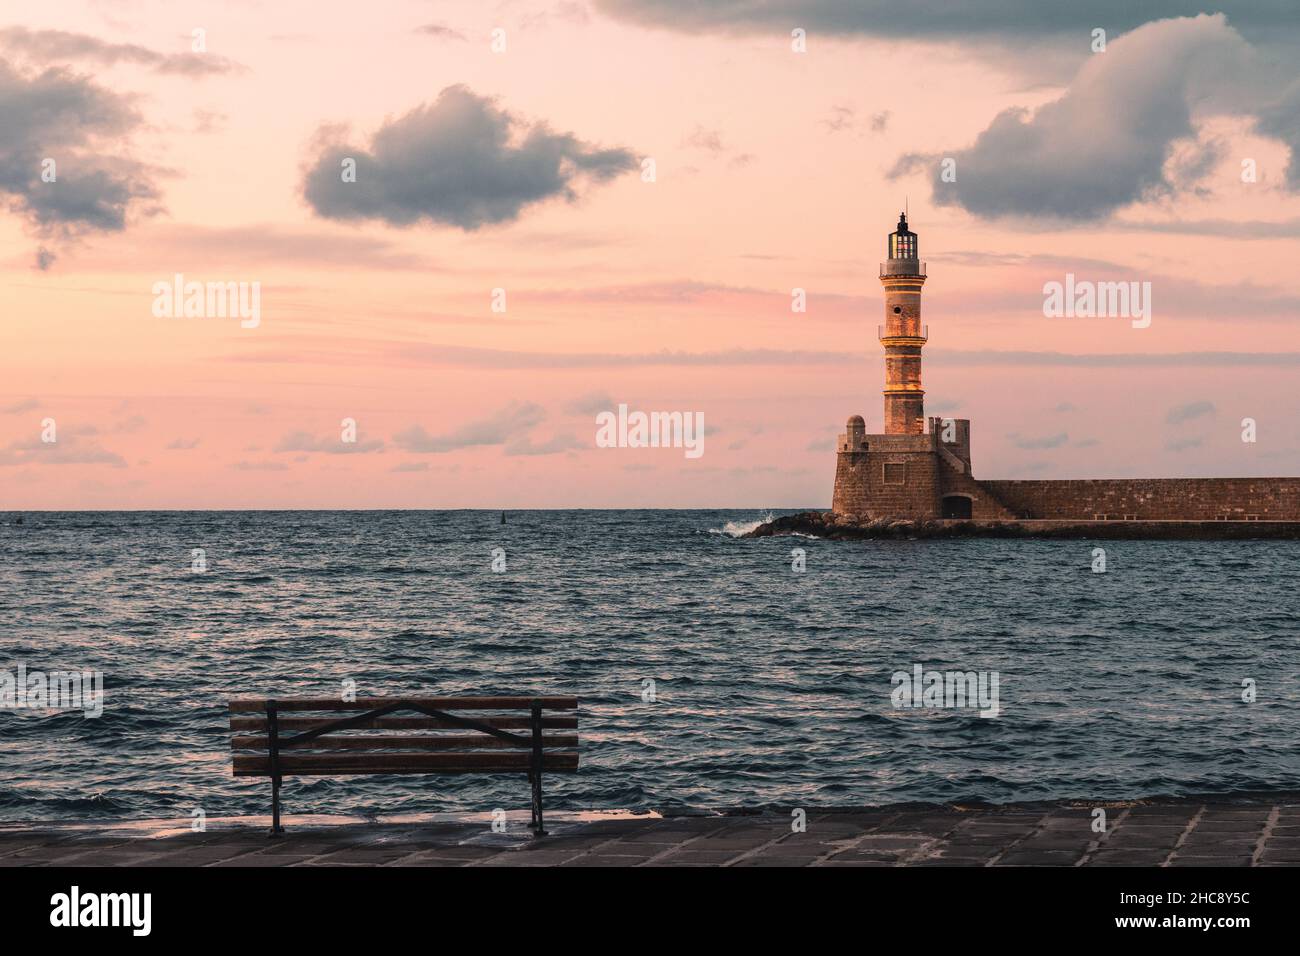 Sunset at the lighthouse of the Venetian port in old town of Chania - Crete Island, Greece Stock Photo